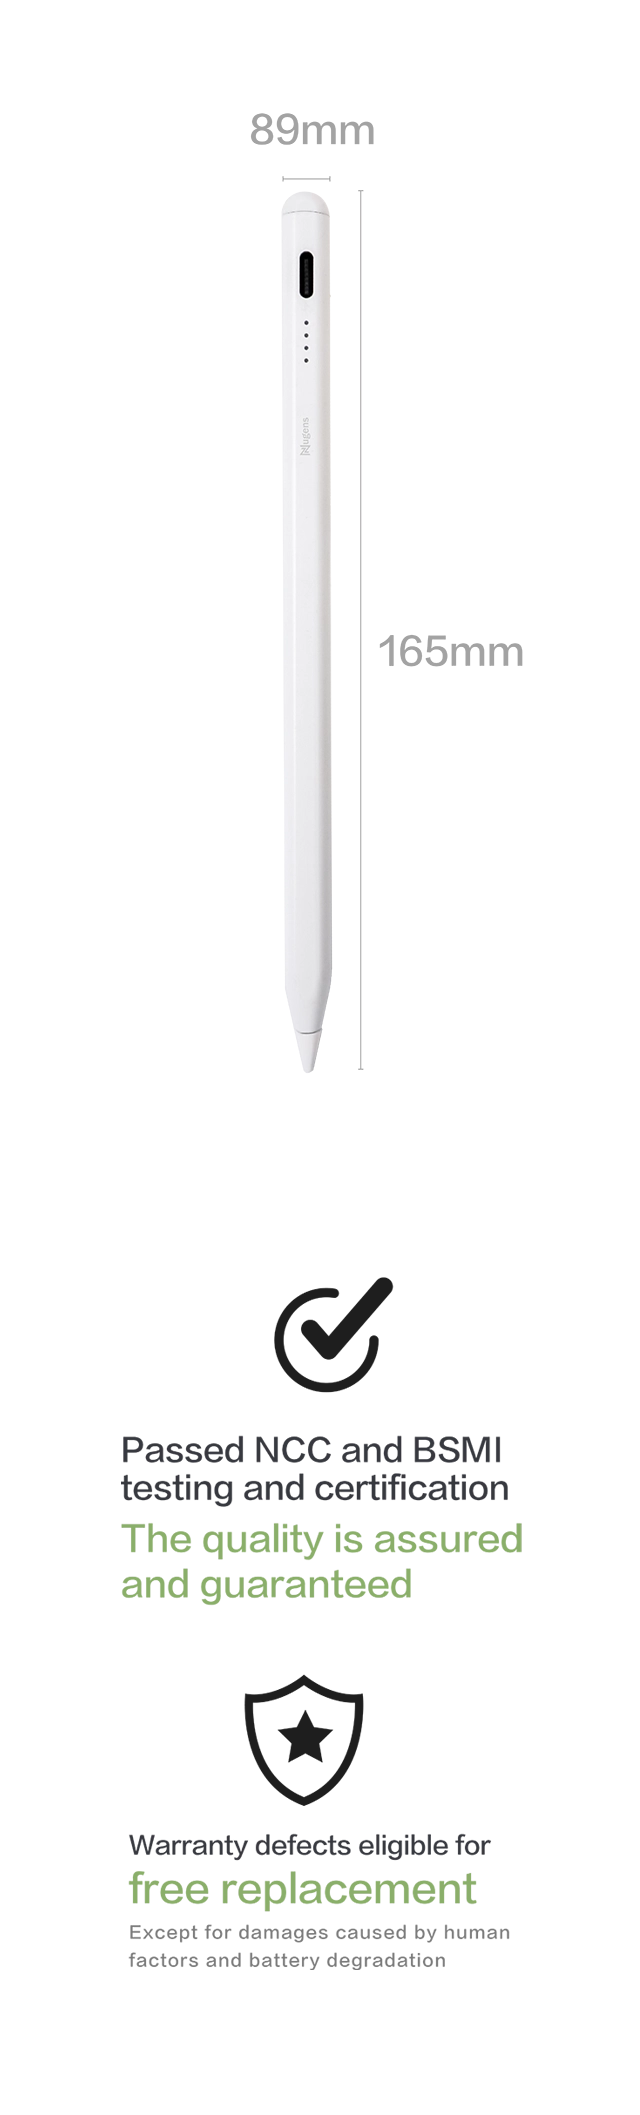 Capacitive magnetic stylus size and certification(mobile version)